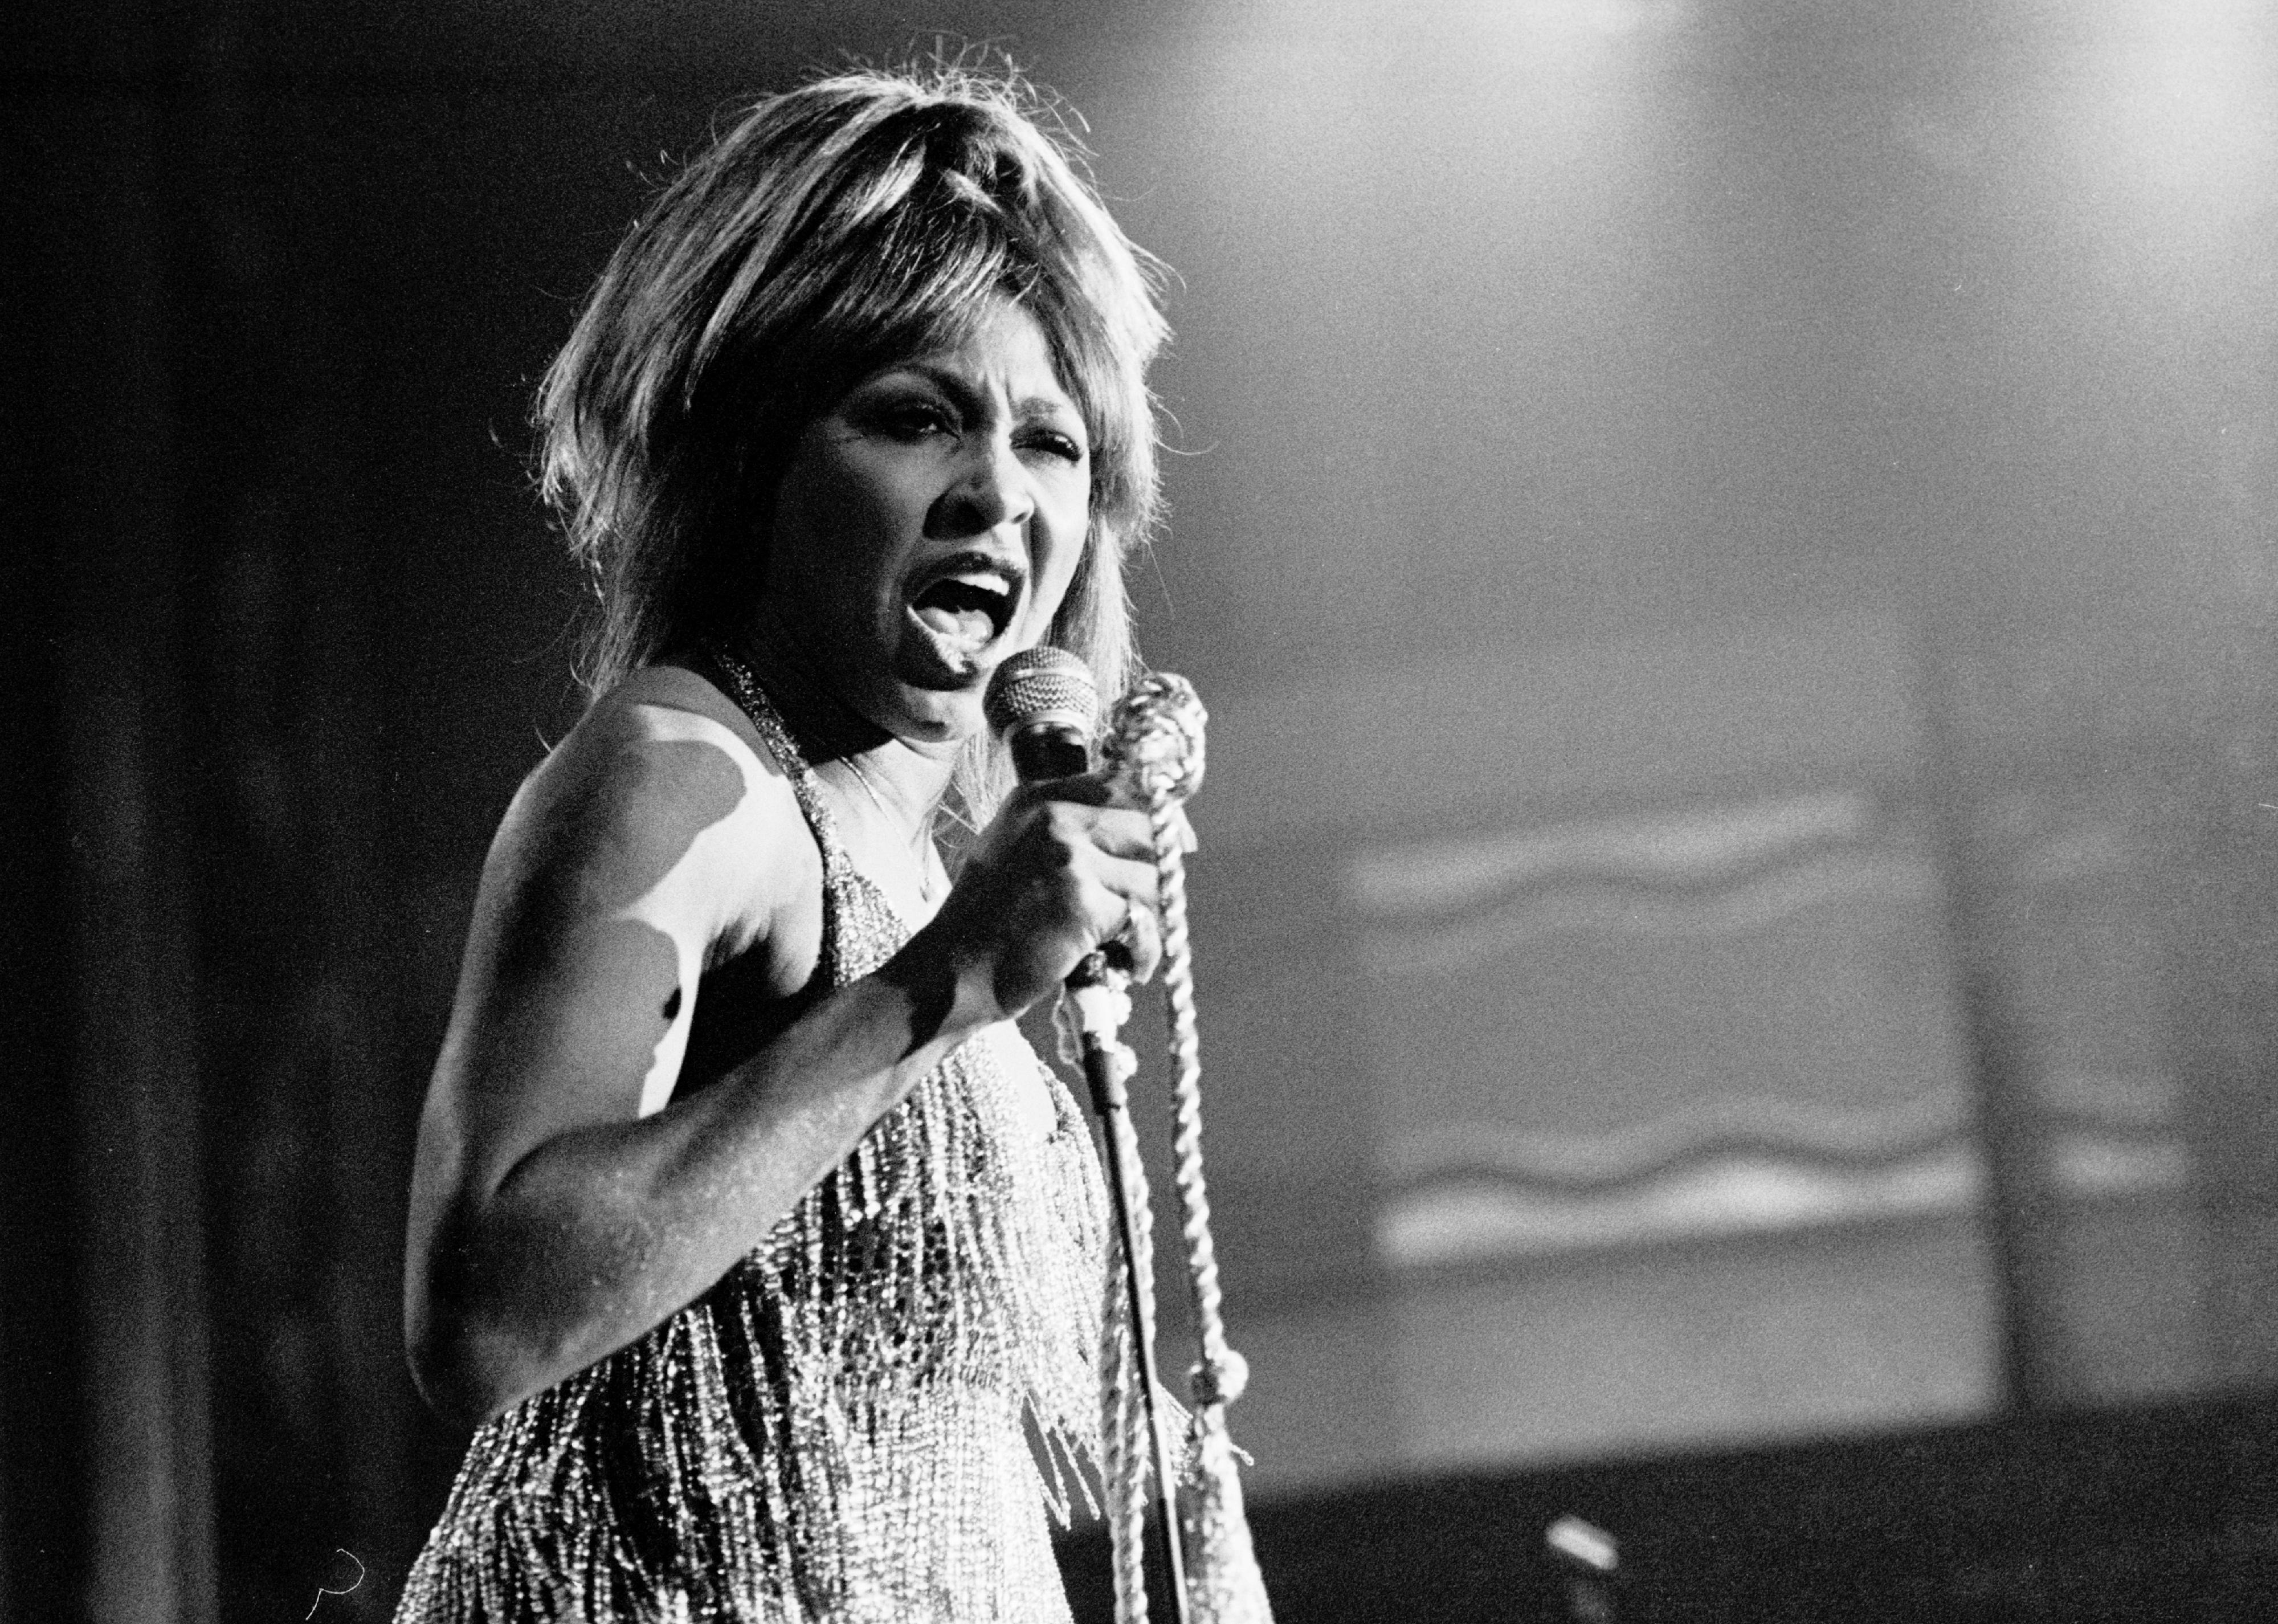 Tina Turner performs onstage at the Ritz, New York.